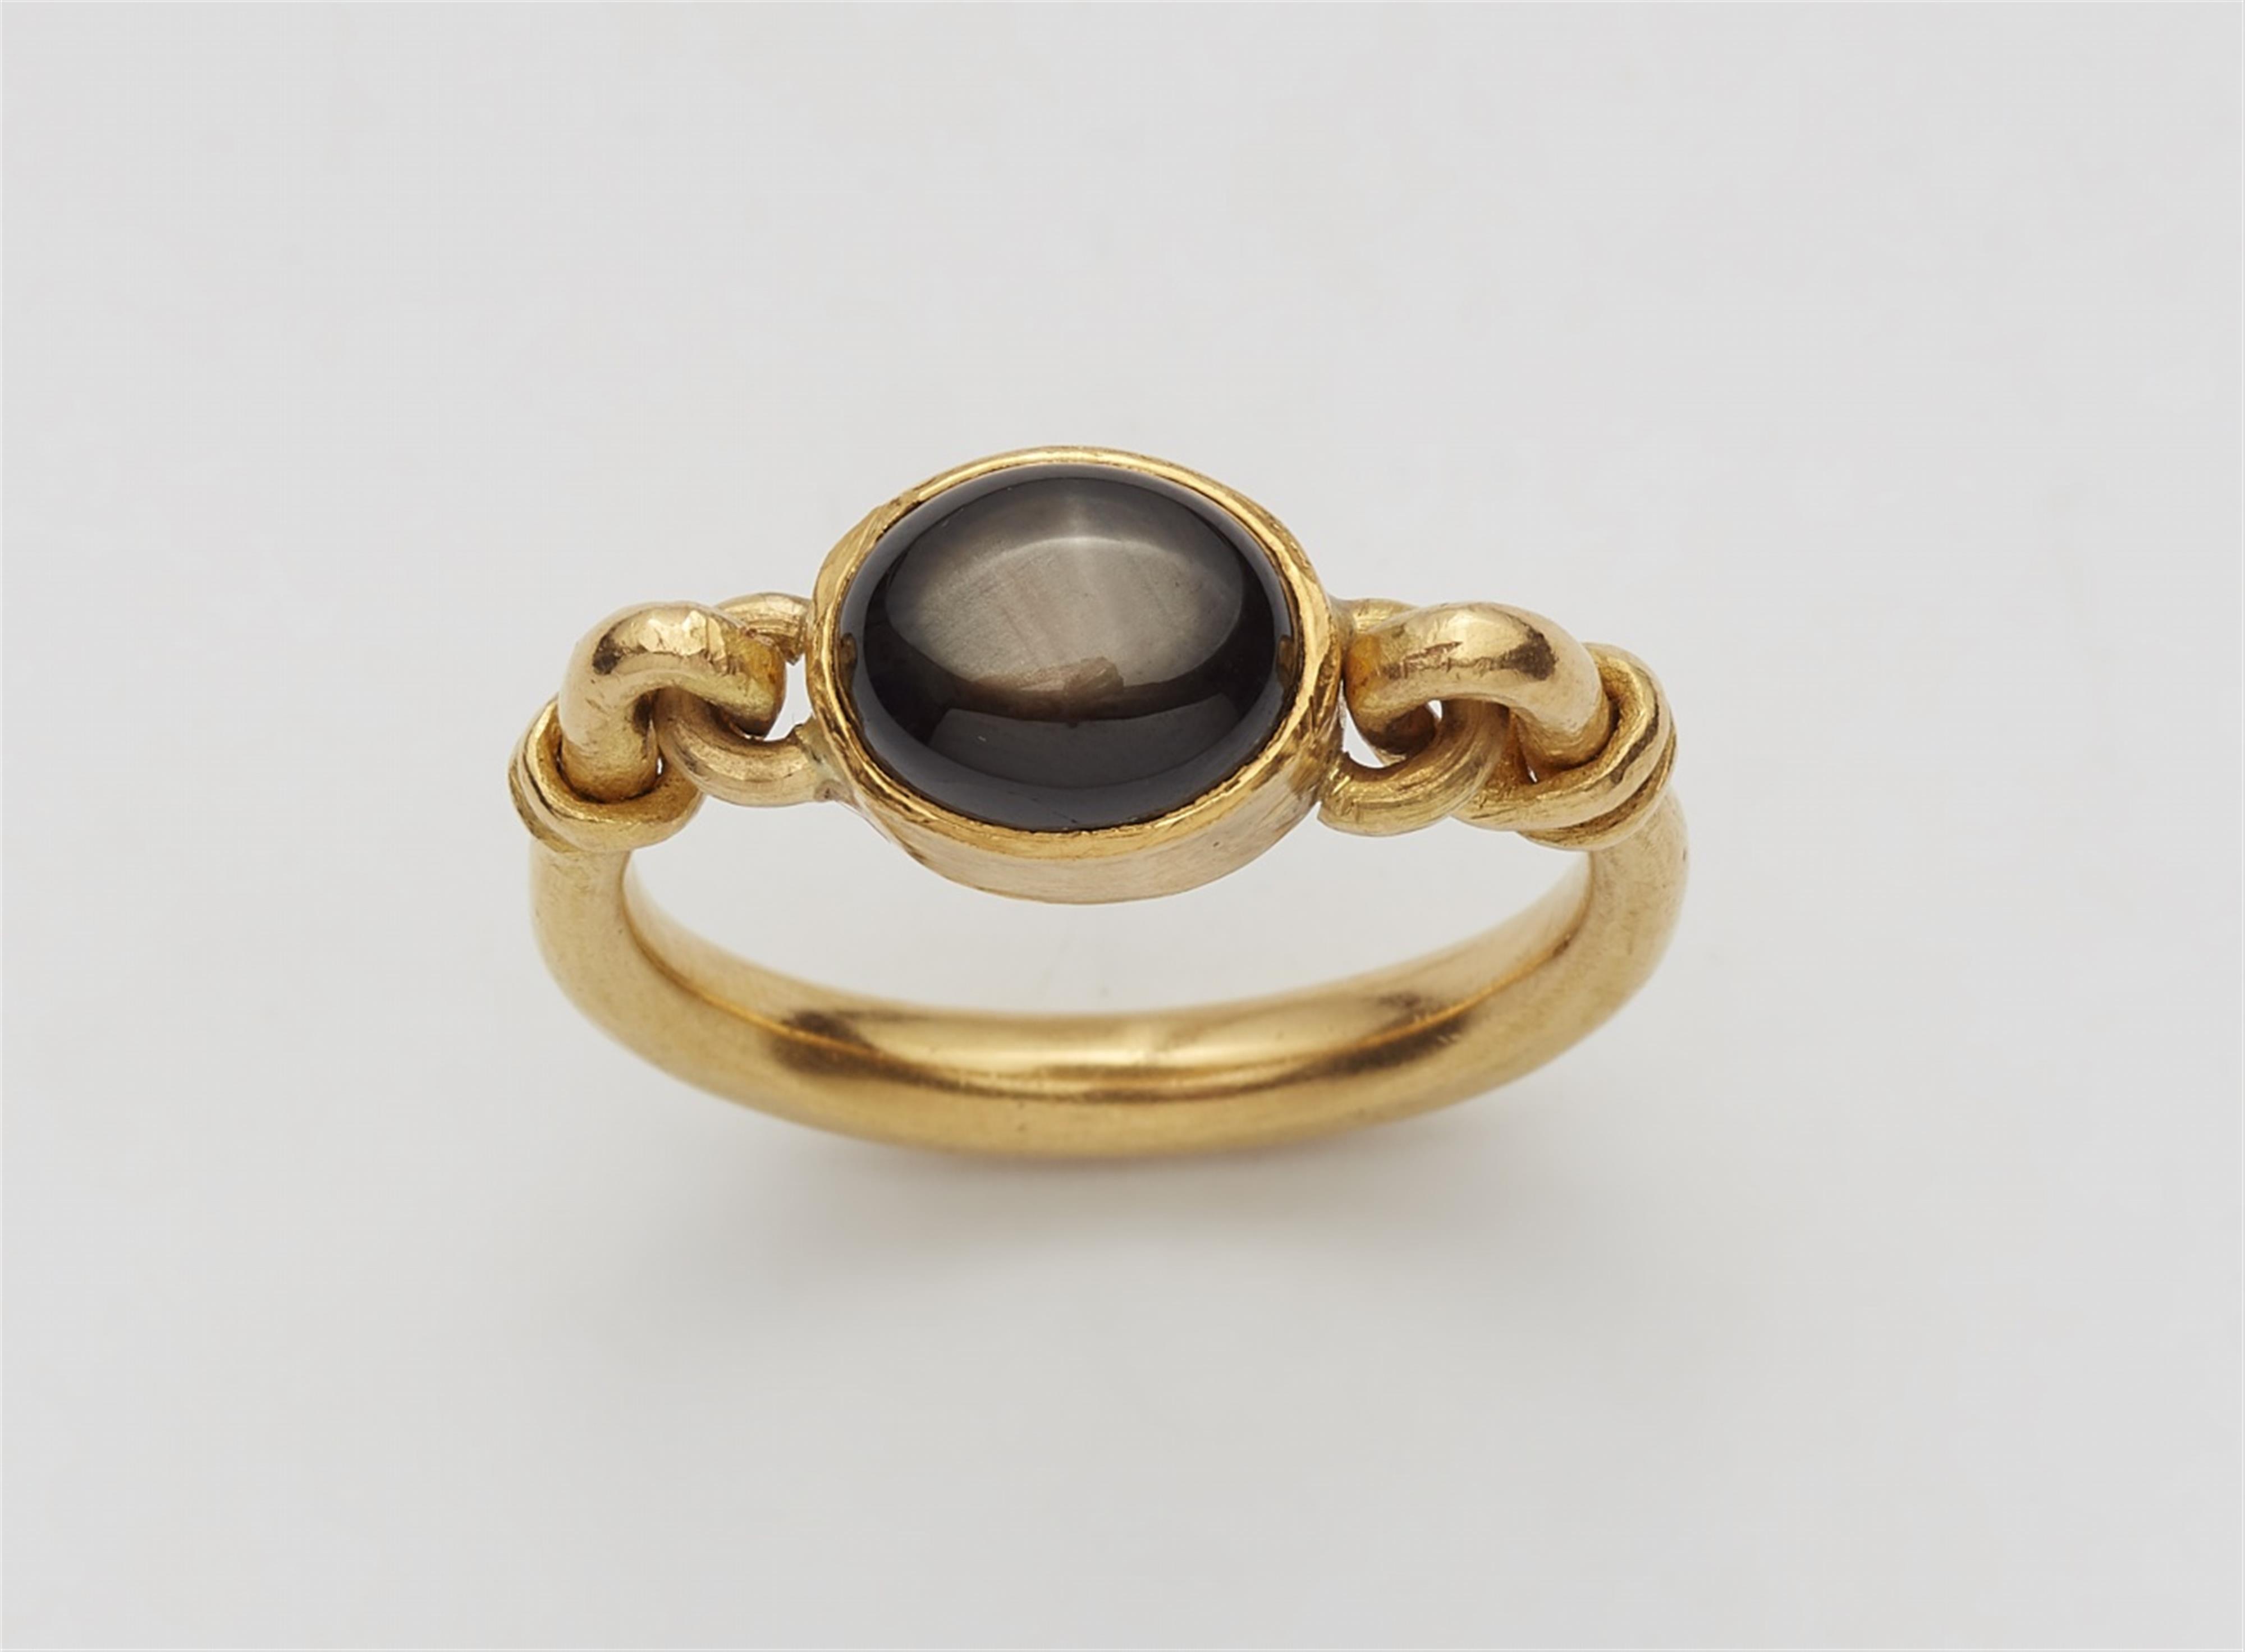 A gentleman's 21k gold ring with a star sapphire - image-1